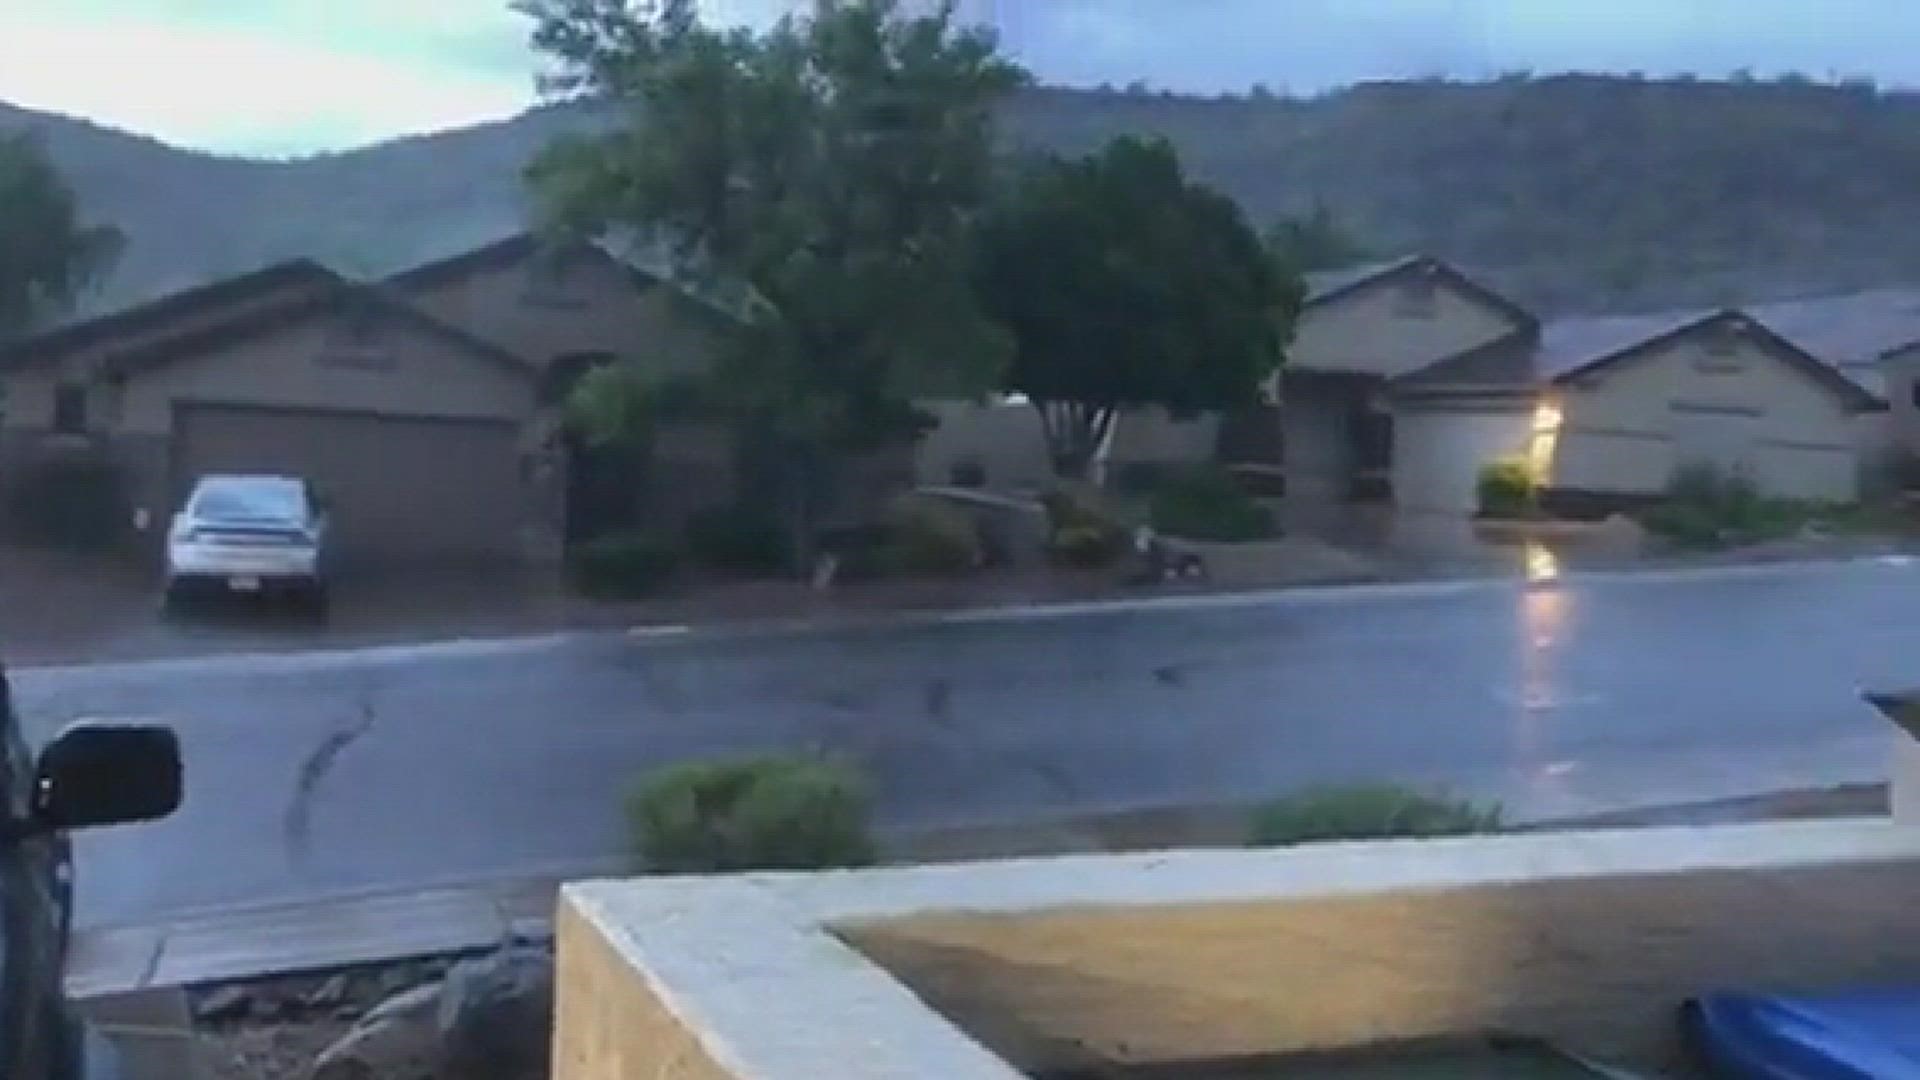 Rain in the Stetson Hills area of Phoenix Thursday night.
Credit: Jeanne Sapon